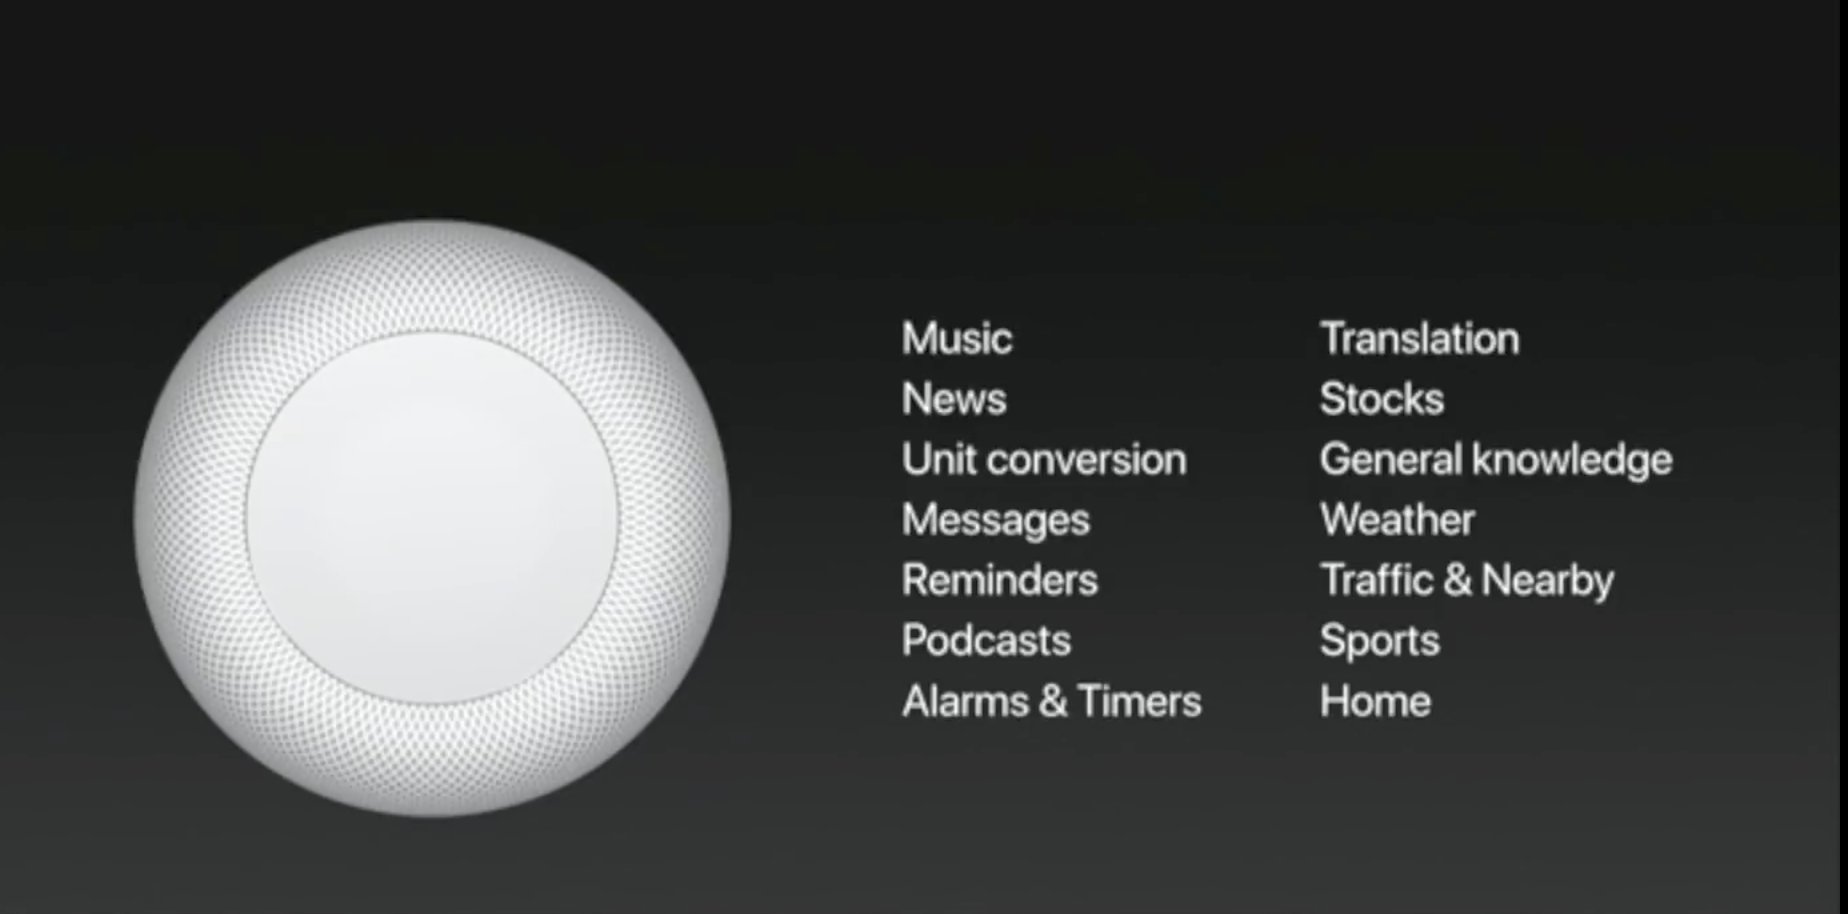 These are the things that Siri needs to know all about for the Apple HomePod - Apple seeks an "Event Maven" for Siri